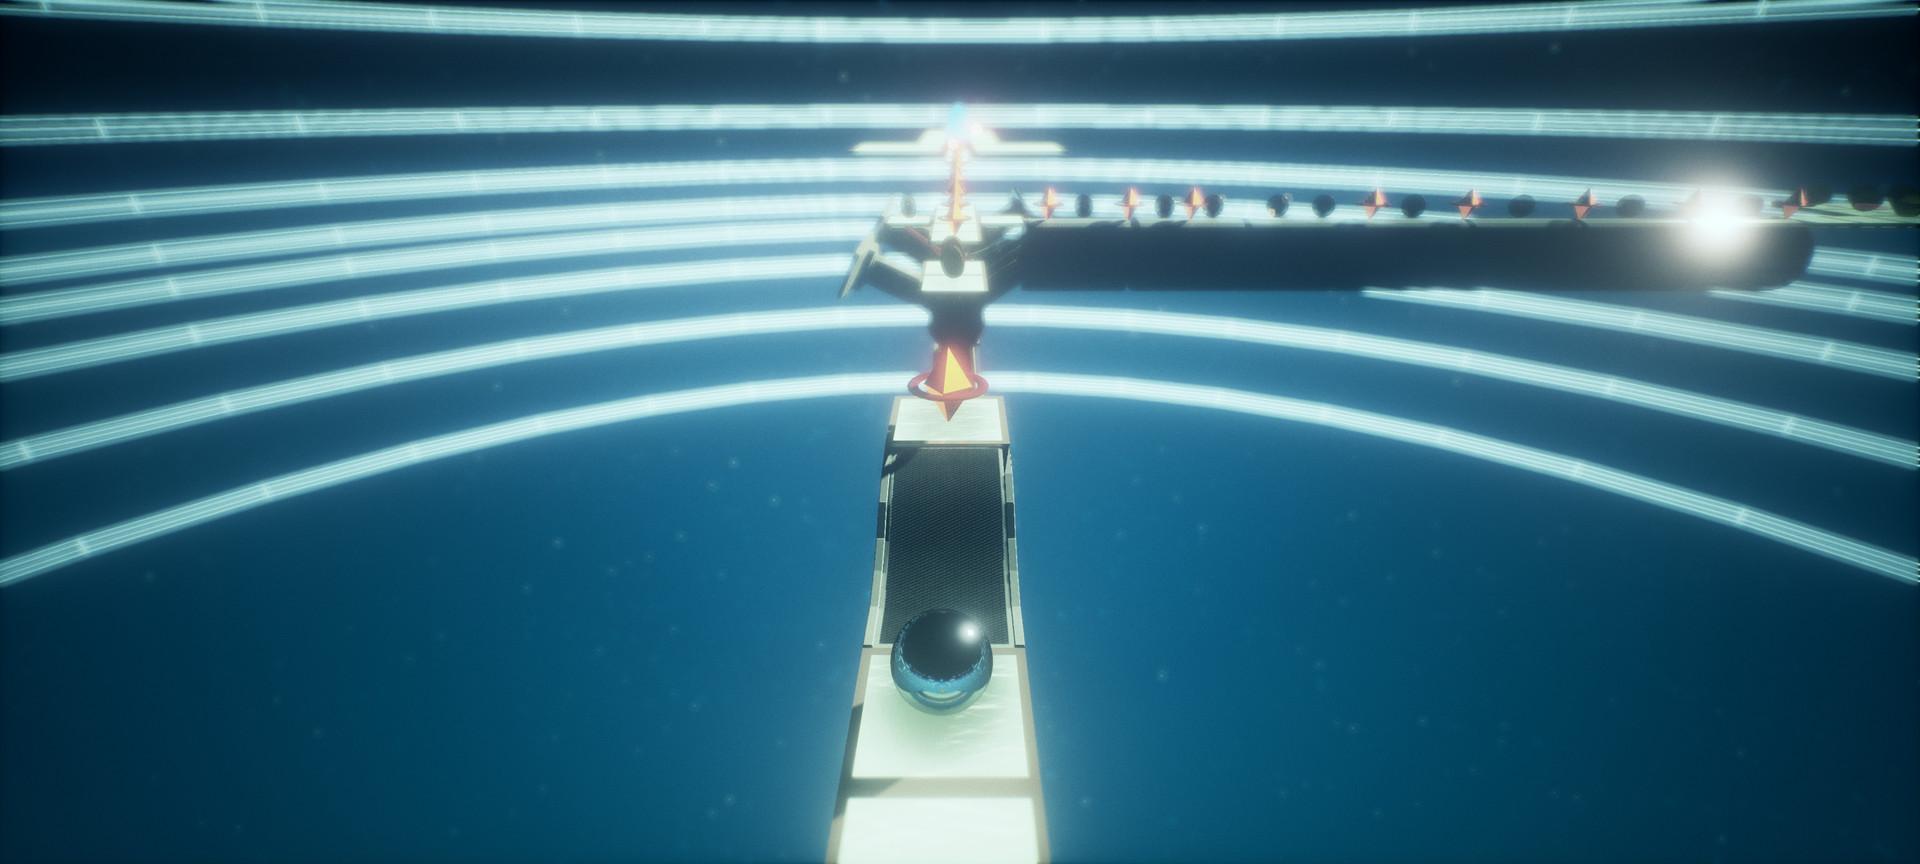 Screenshot №2 from game Hyposphere